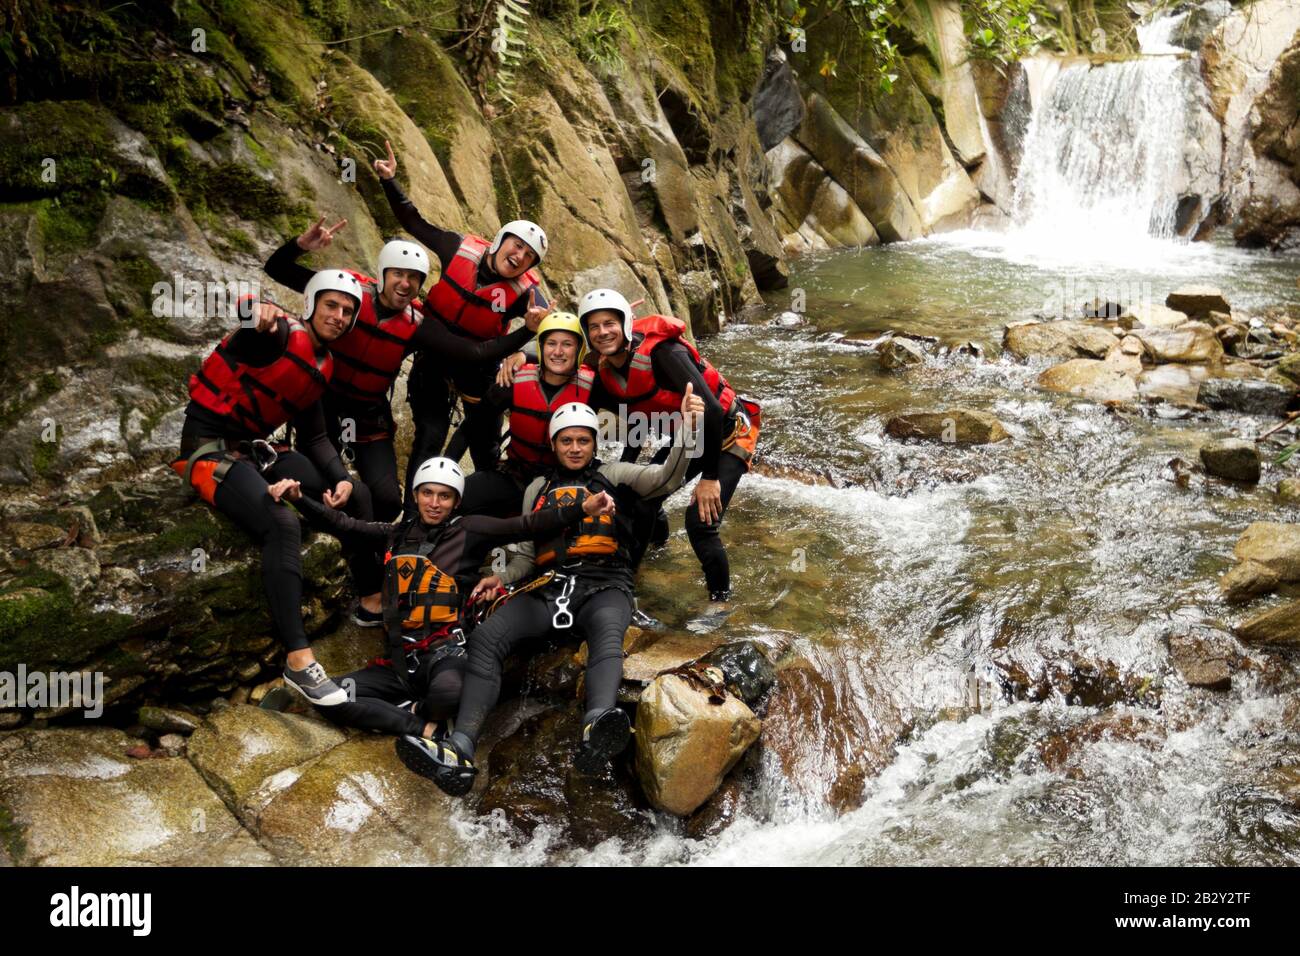 Union Of Active Teenage Human During A Canyoning Expedition In Ecuadorian Rainforest Stock Photo